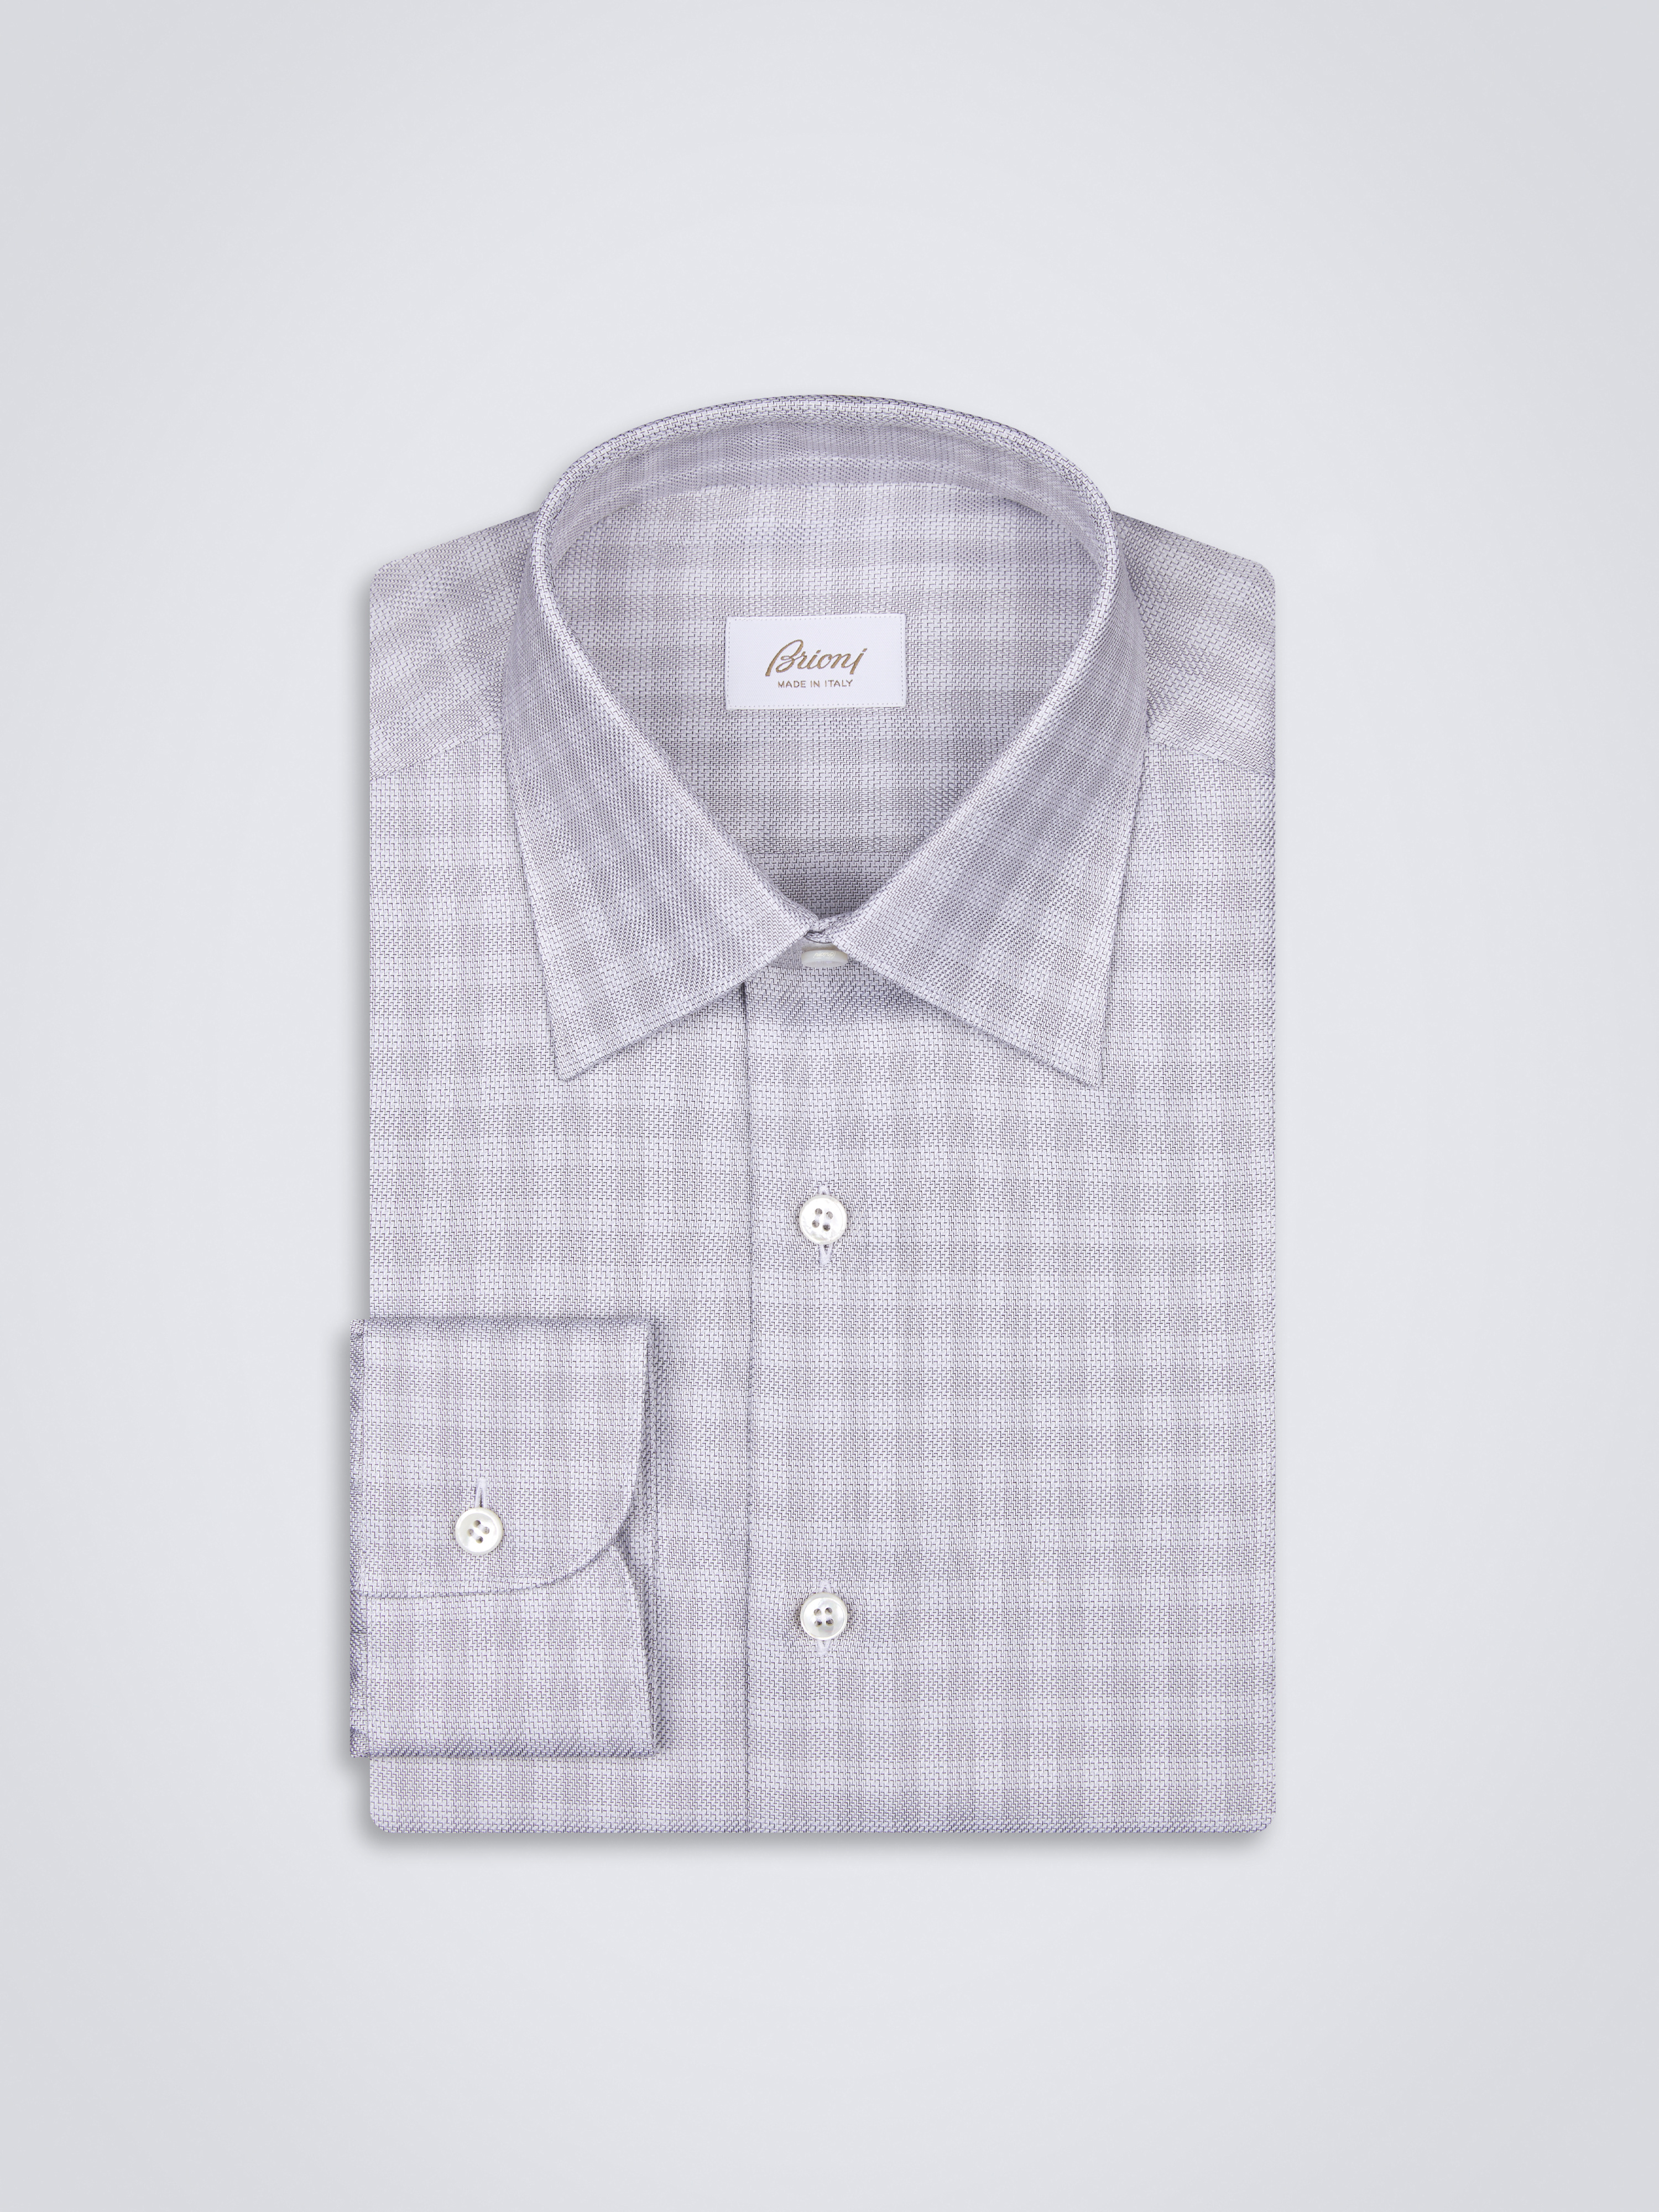 Grey and white cotton formal shirt | Brioni® US Official Store